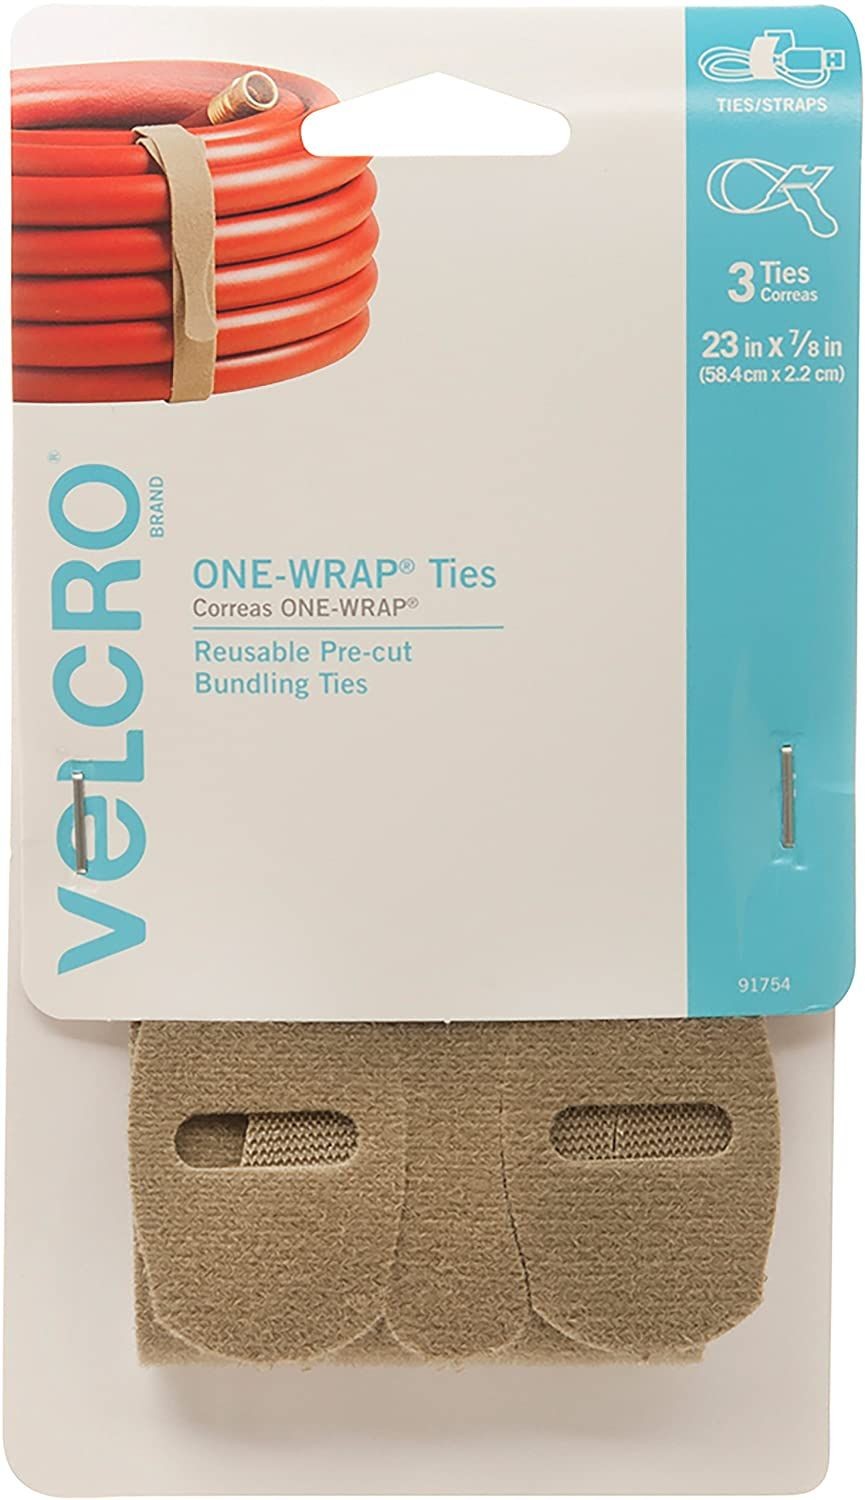 Velcro Brands 91754 ONE-WRAP Ties Reusable Pre-cut and Self Gripping Heavy Duty Extension Cords 3 Ct 23" x 7/8" Tan, 3 Pk